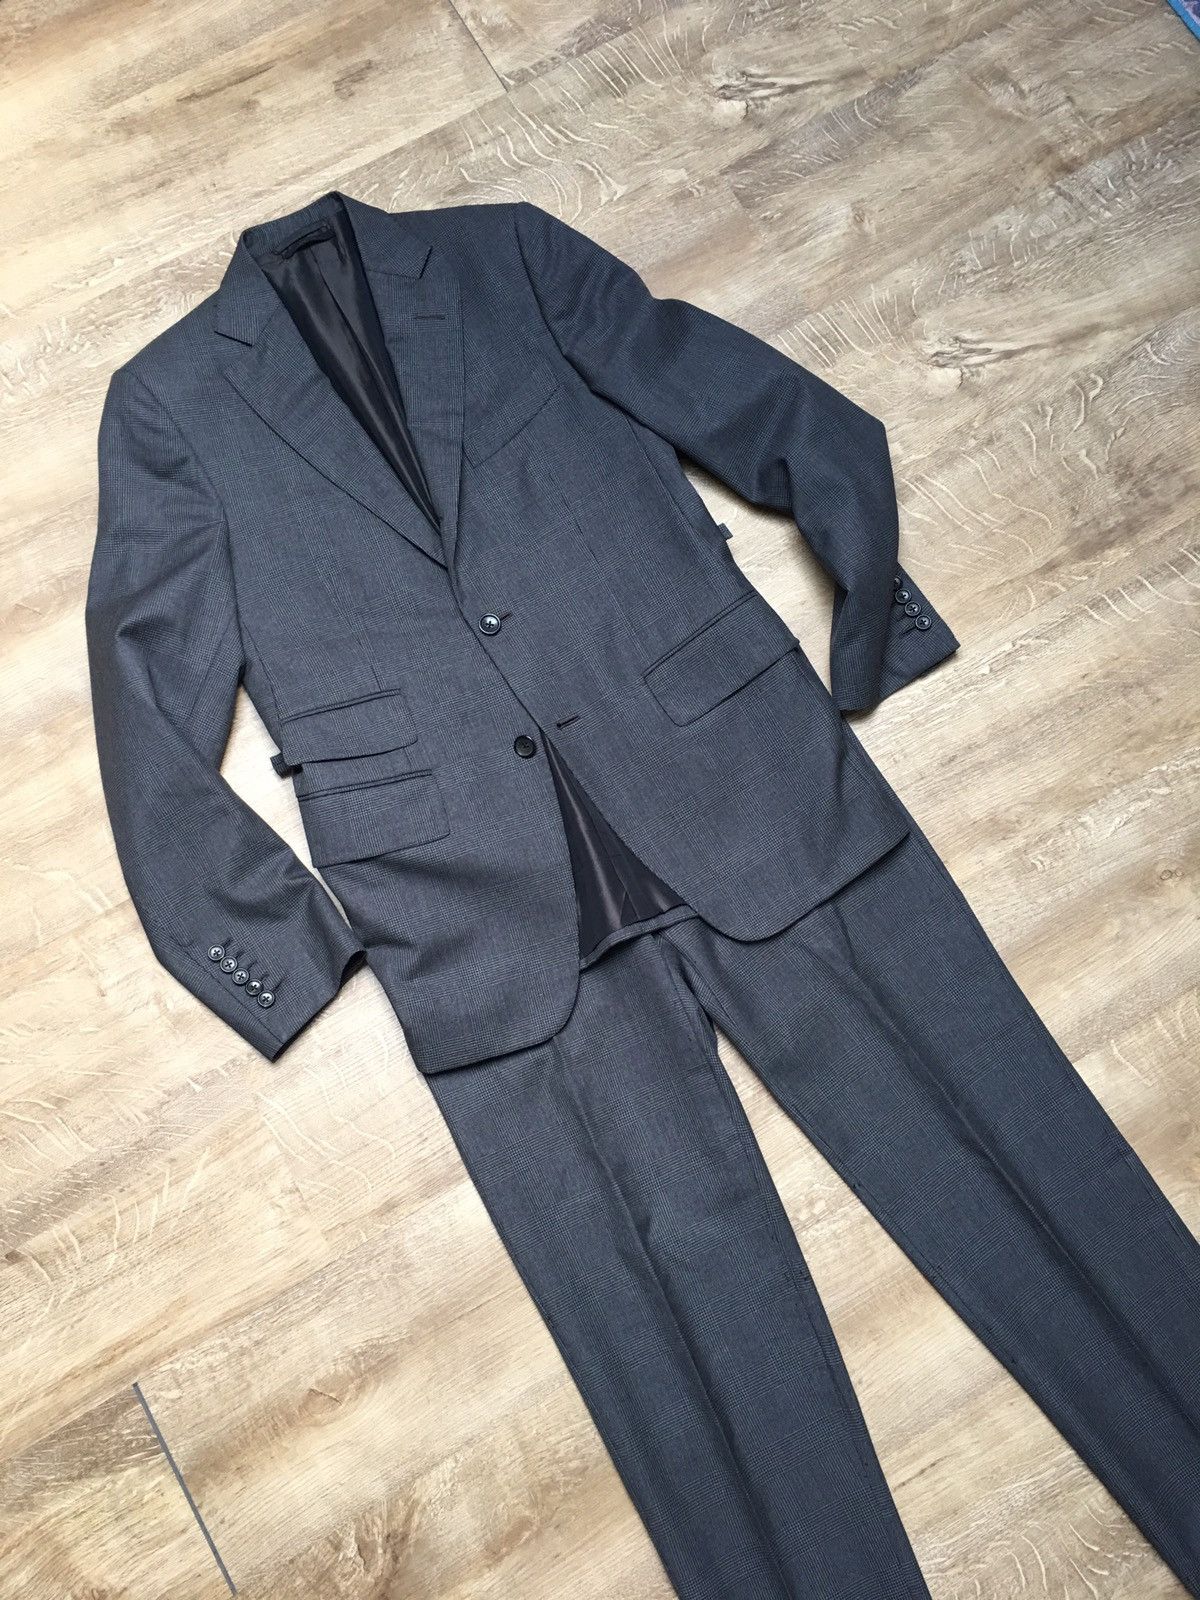 Tom Ford Tom Ford Suit Size 38R - 9 Thumbnail